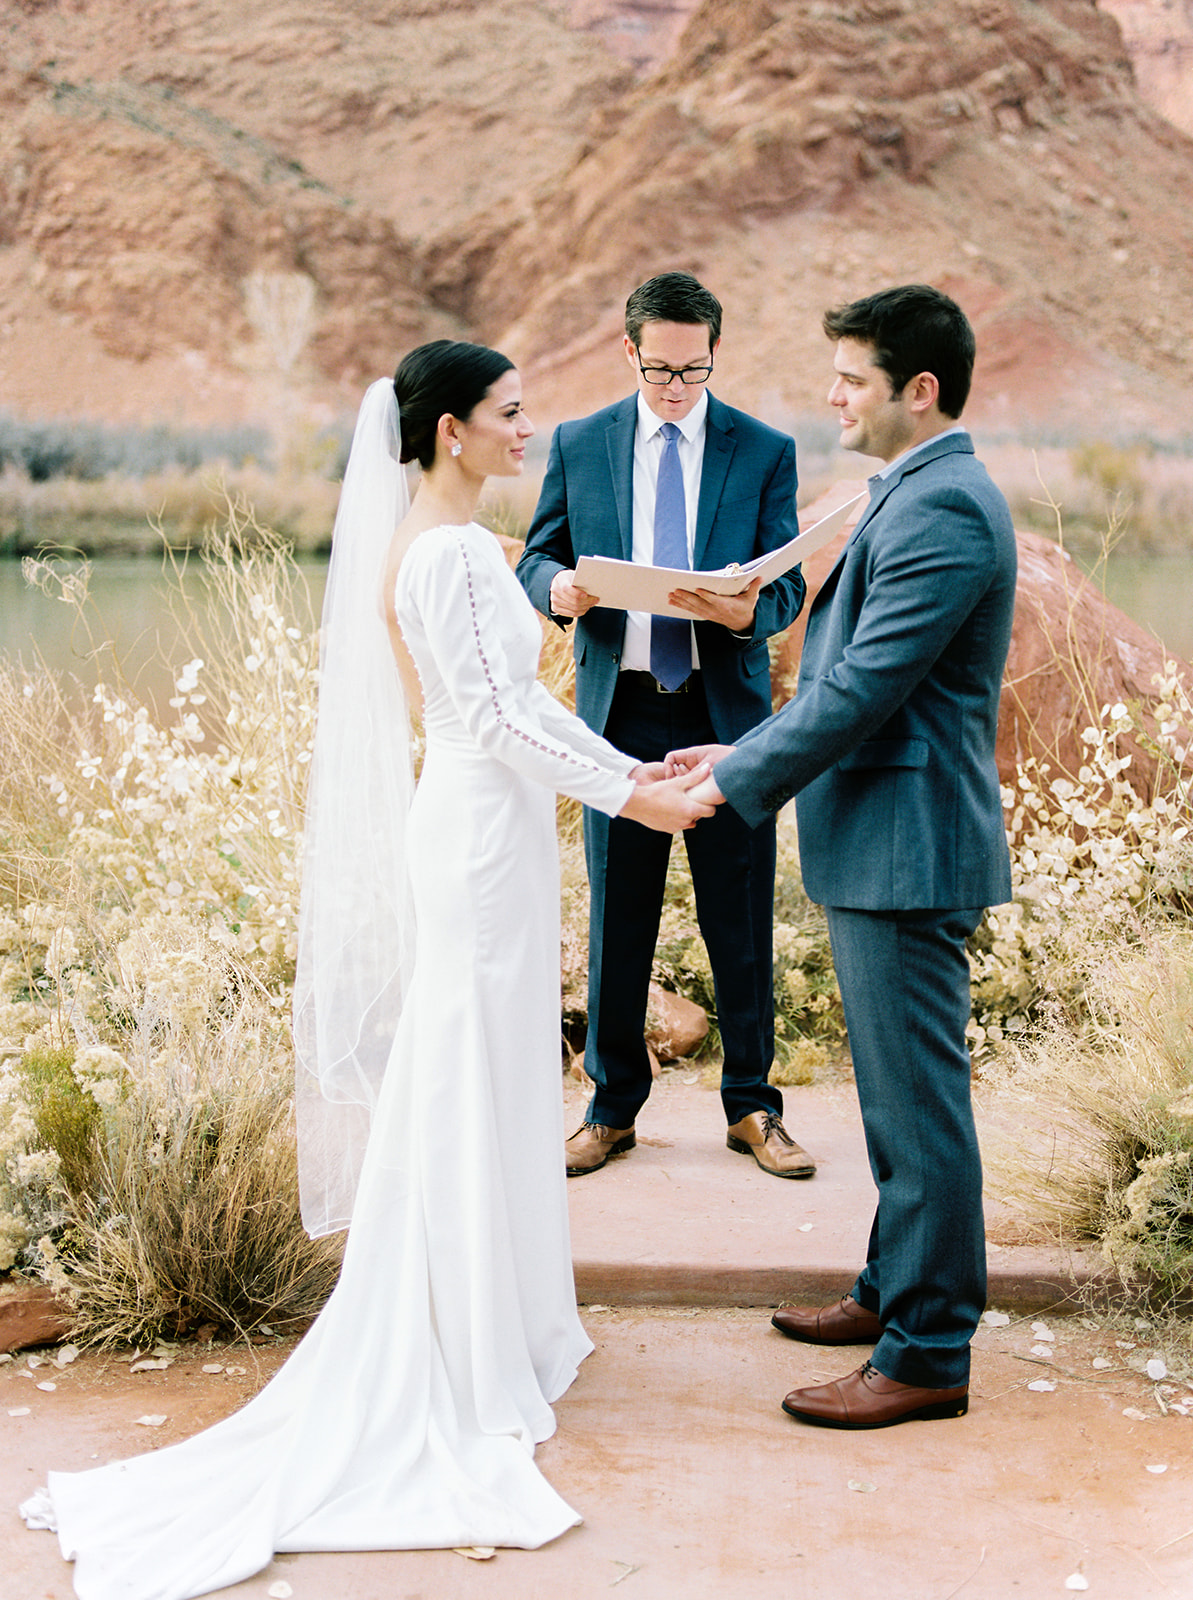 bride and groom exchange vows at their intimate destination wedding in moab utah